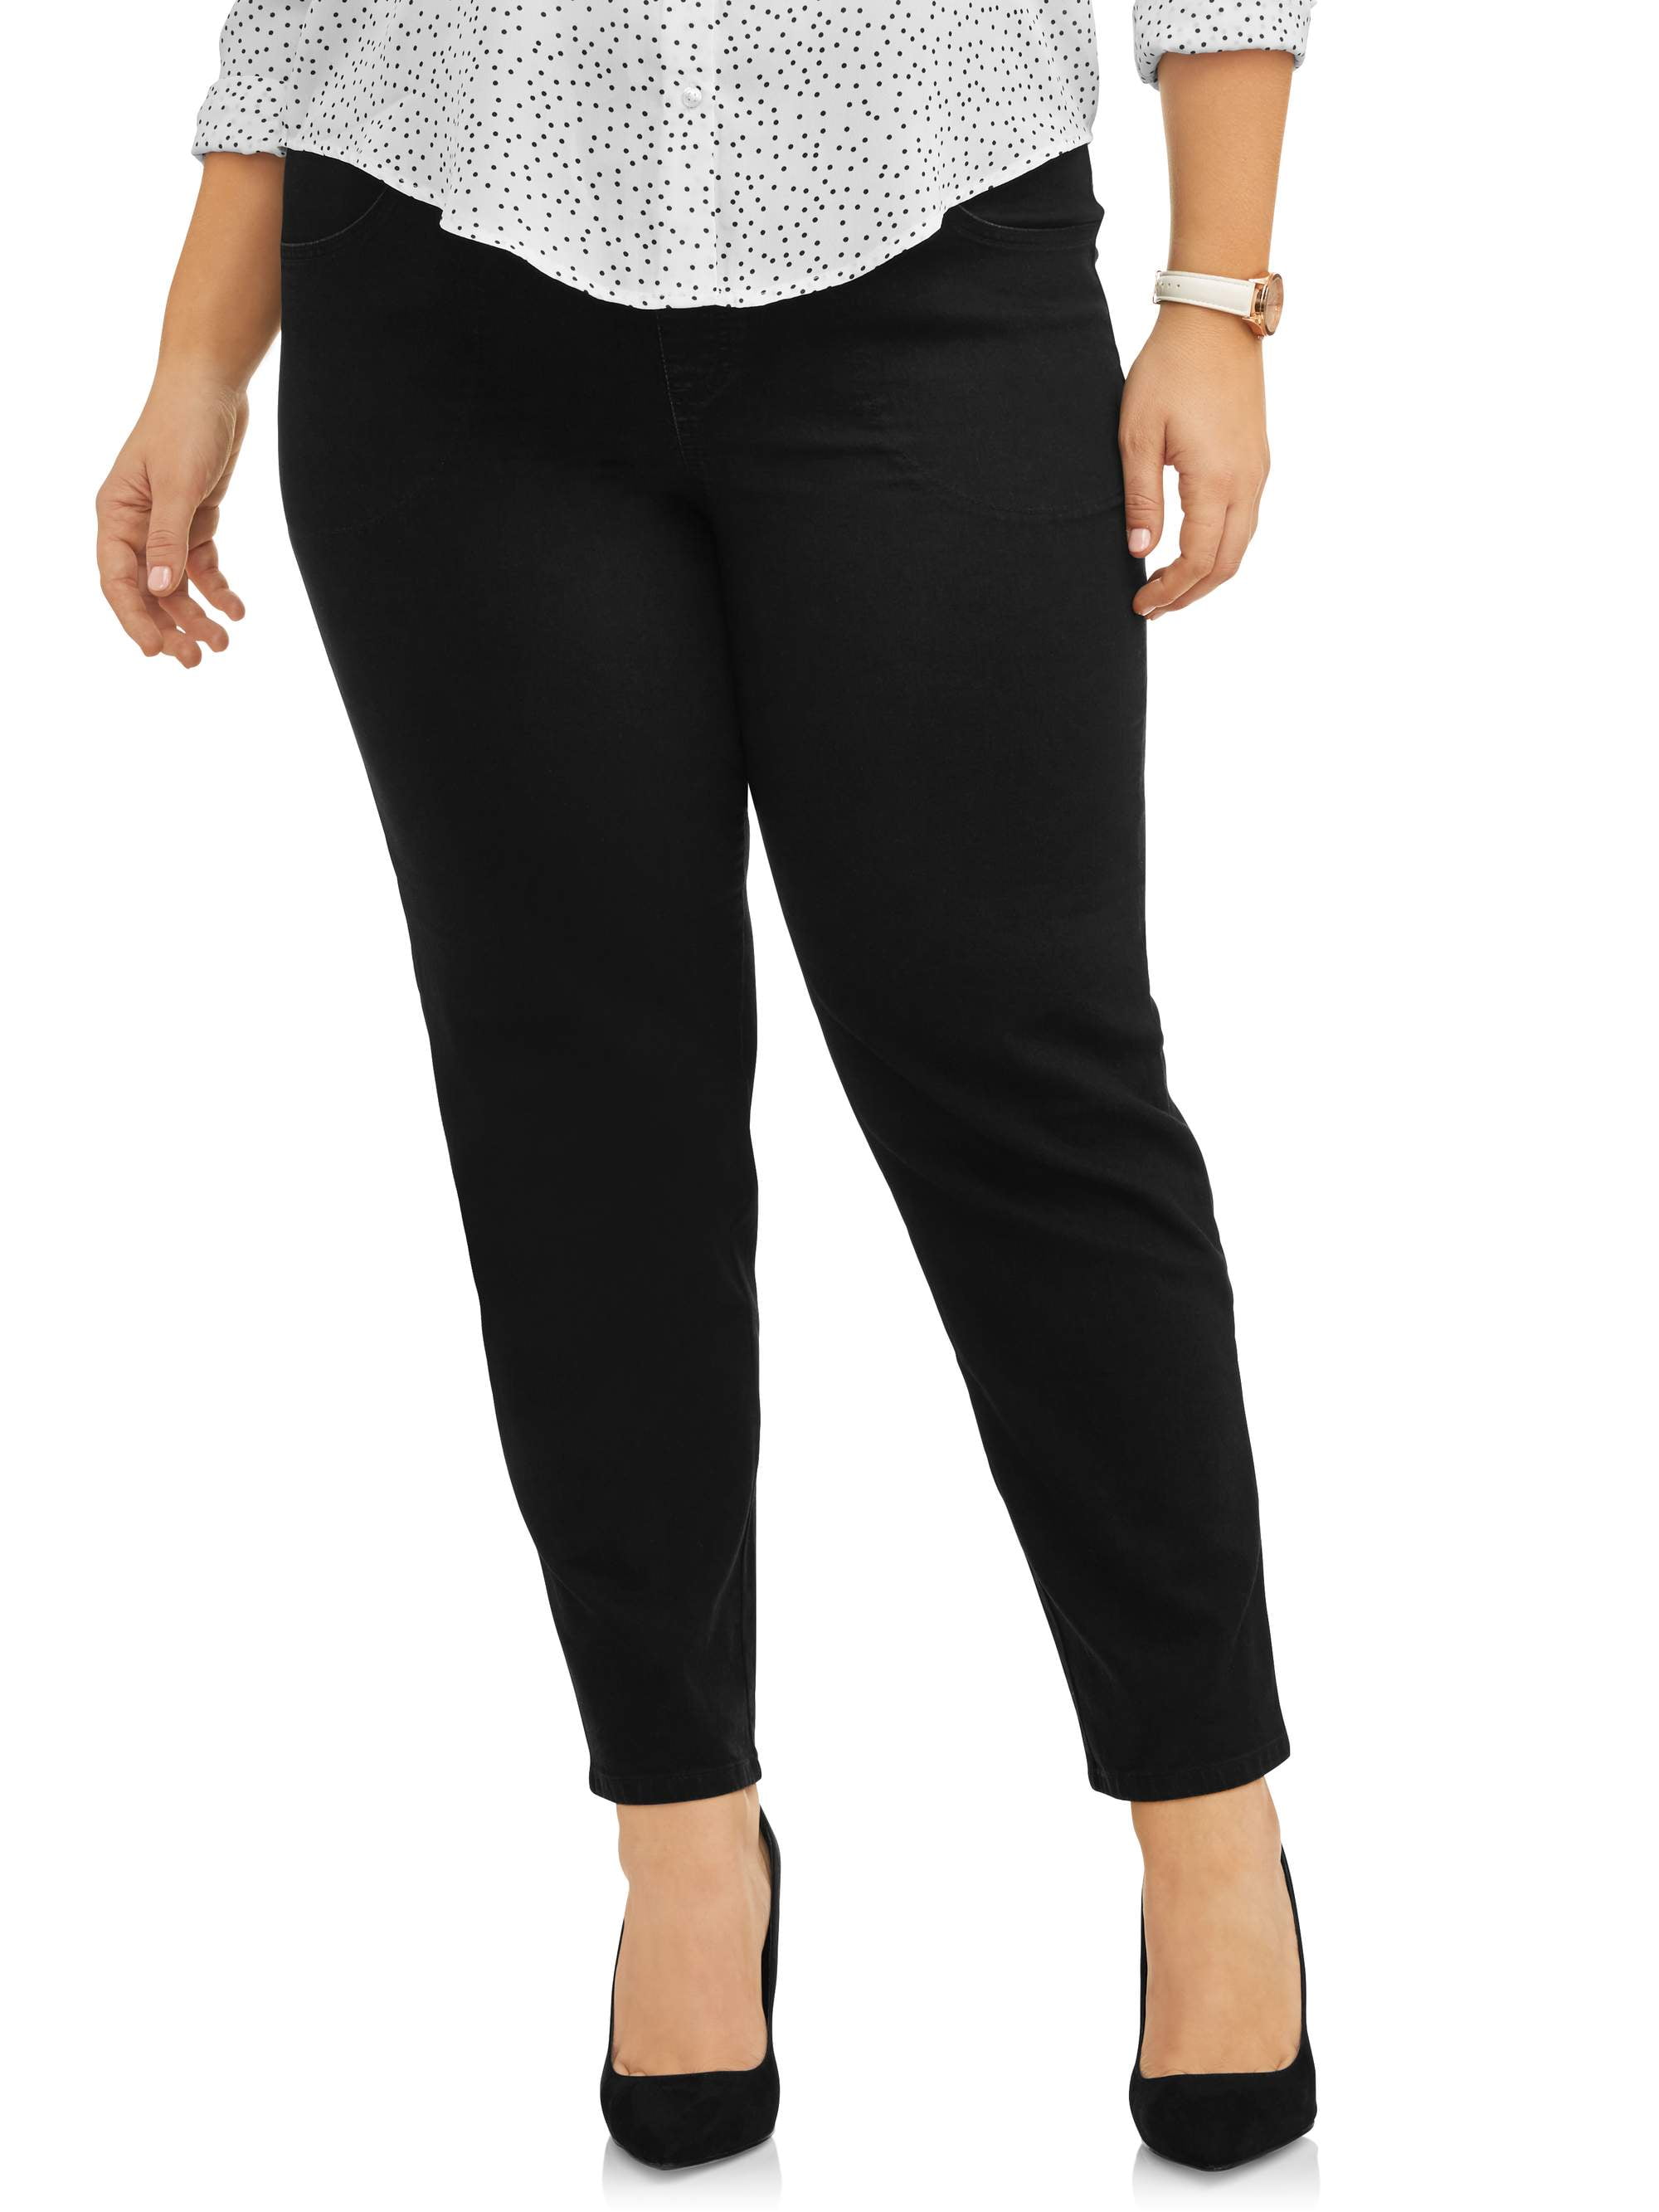 Just My Size Womens Plus Size Stretch Corduroy 2 Pocket Pants Available  in Regular and Petite Lengths  Walmartcom